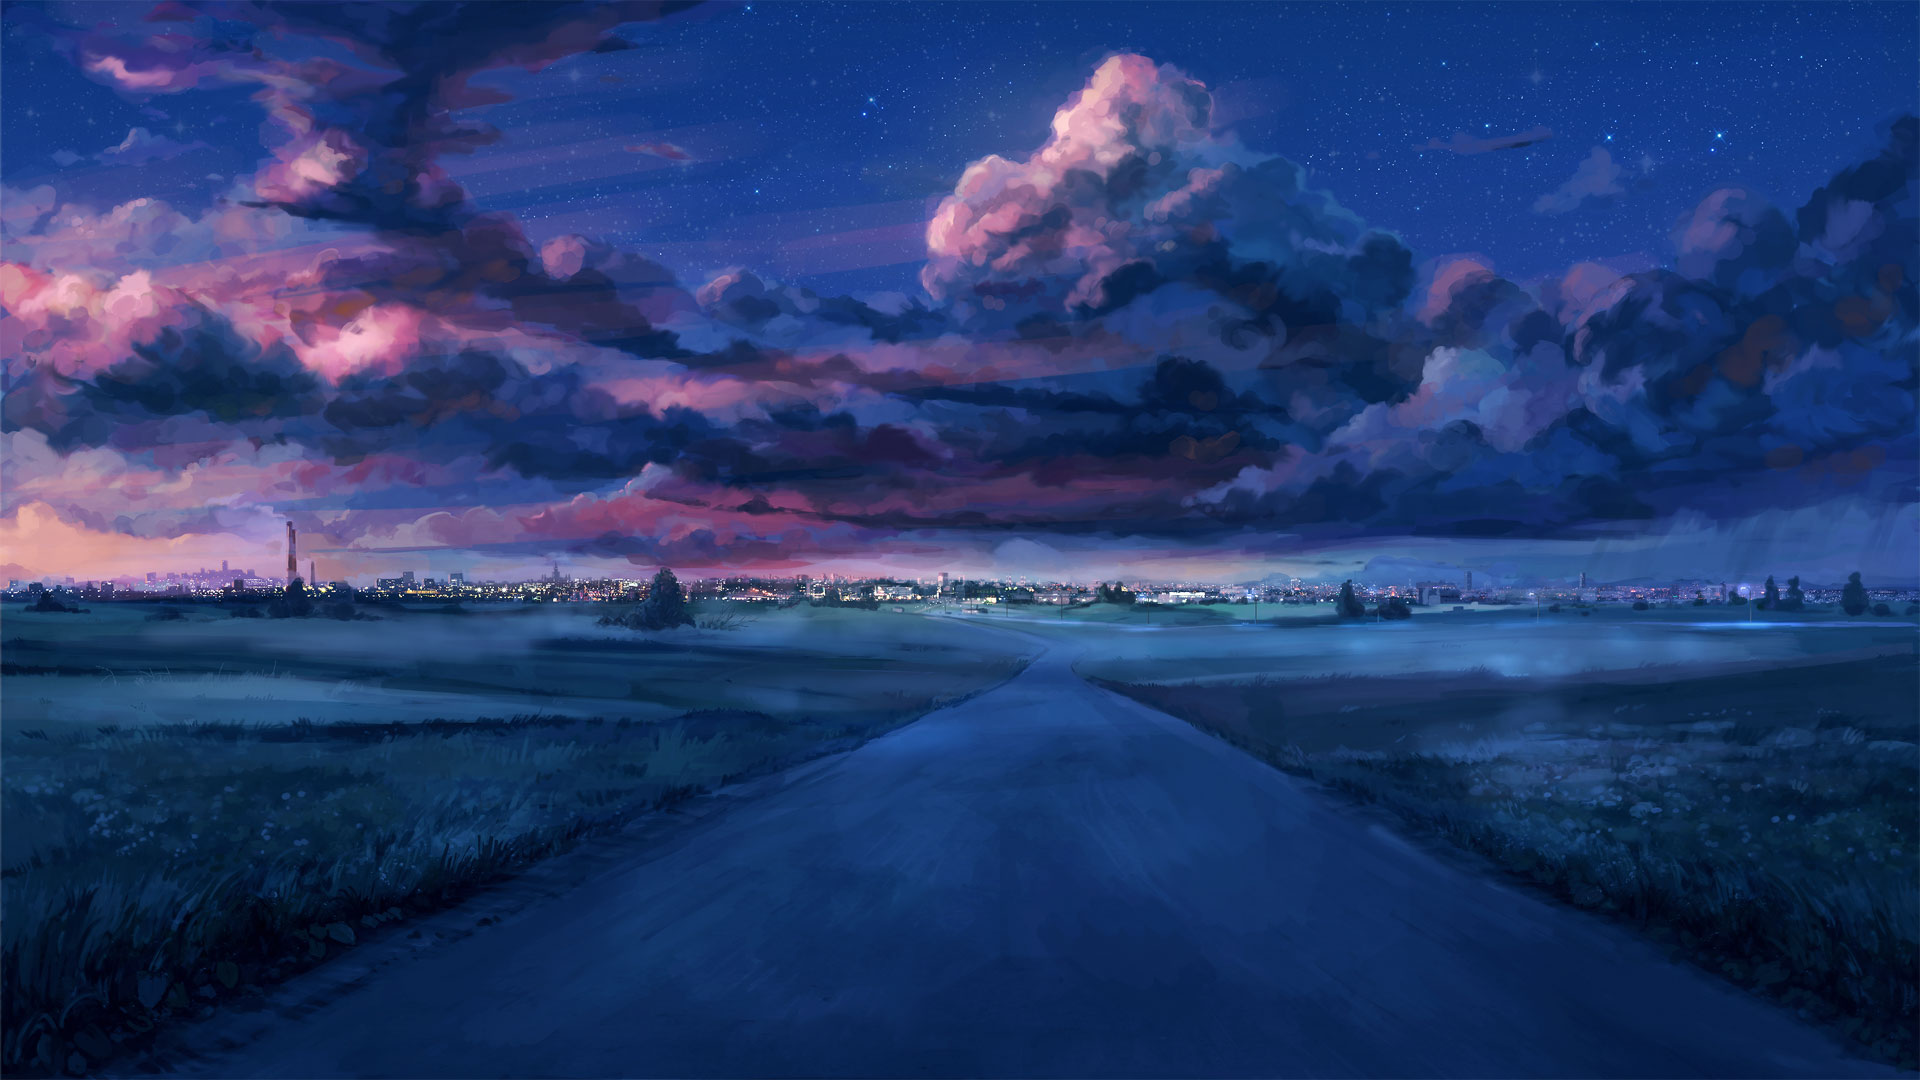 Anime Night Scenery, HD Anime, 4k Wallpapers, Images ...